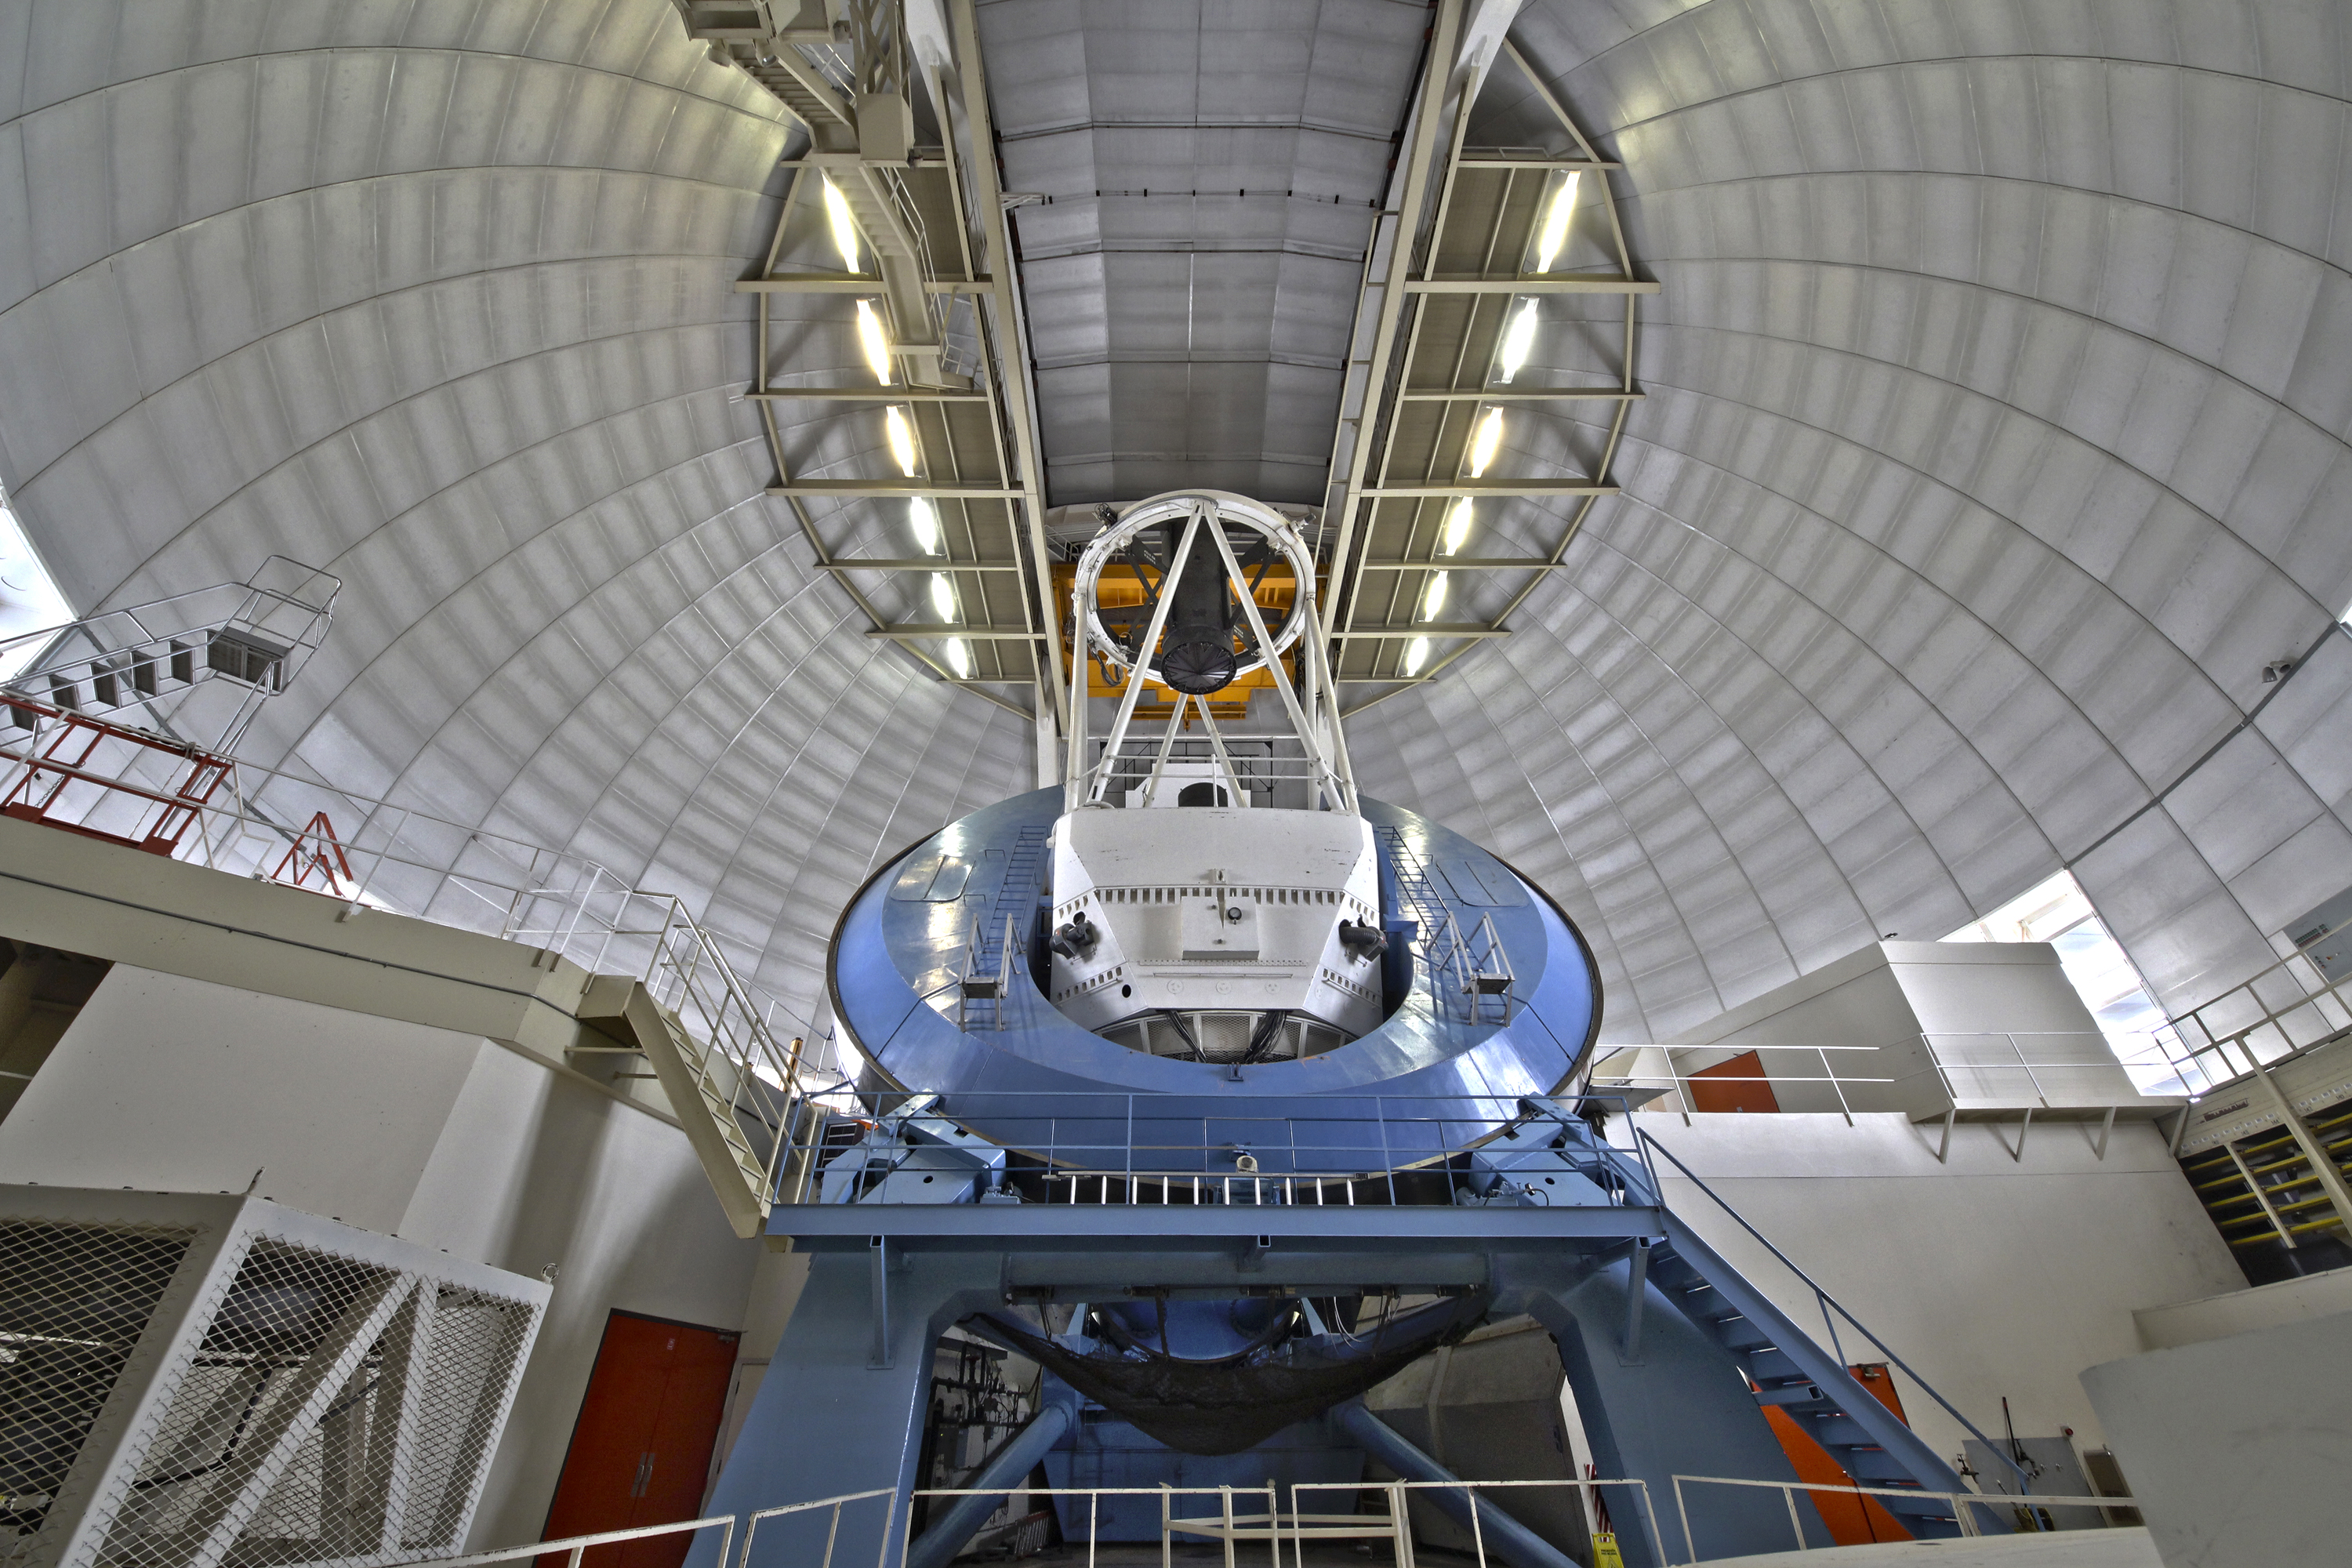 The Mayall Telescope, which hosts the DESI instrument, at the Kitt Peak Observatory